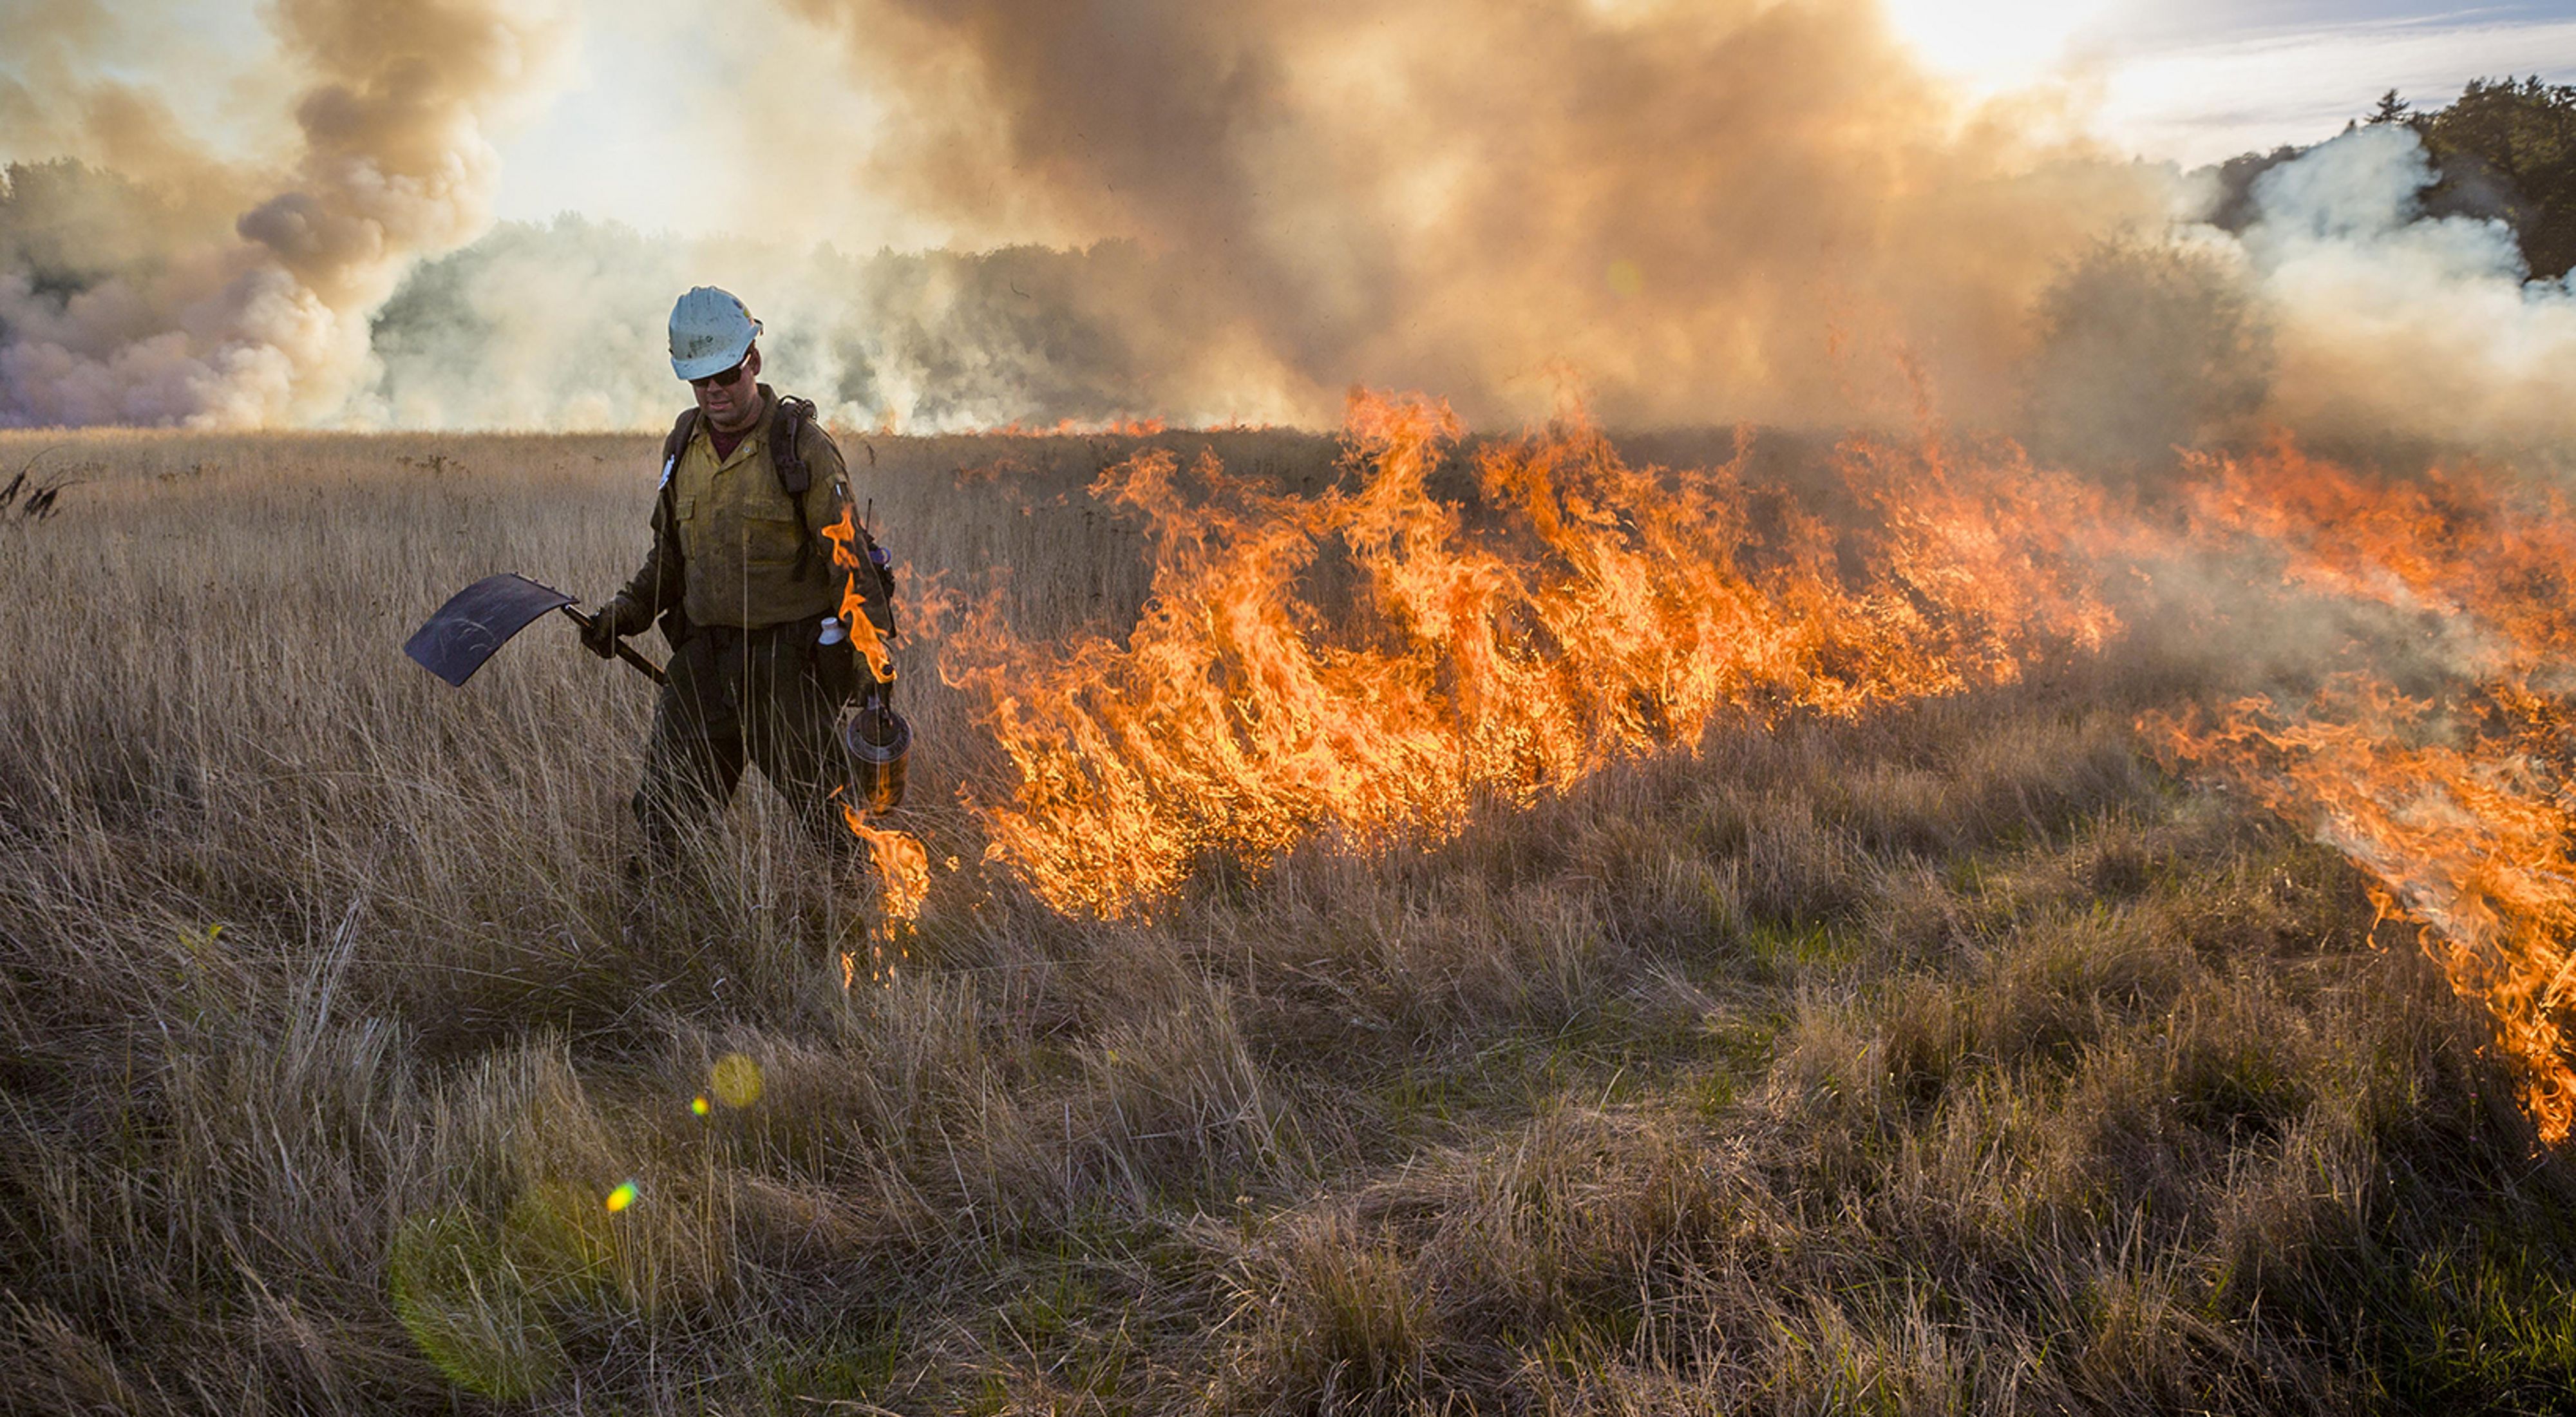 The Nature Conservancy conducts a prescribed burn in Willamette Valley, Oregon. Burns help to promote regeneration of native species in this historically fire adapted ecosystem.